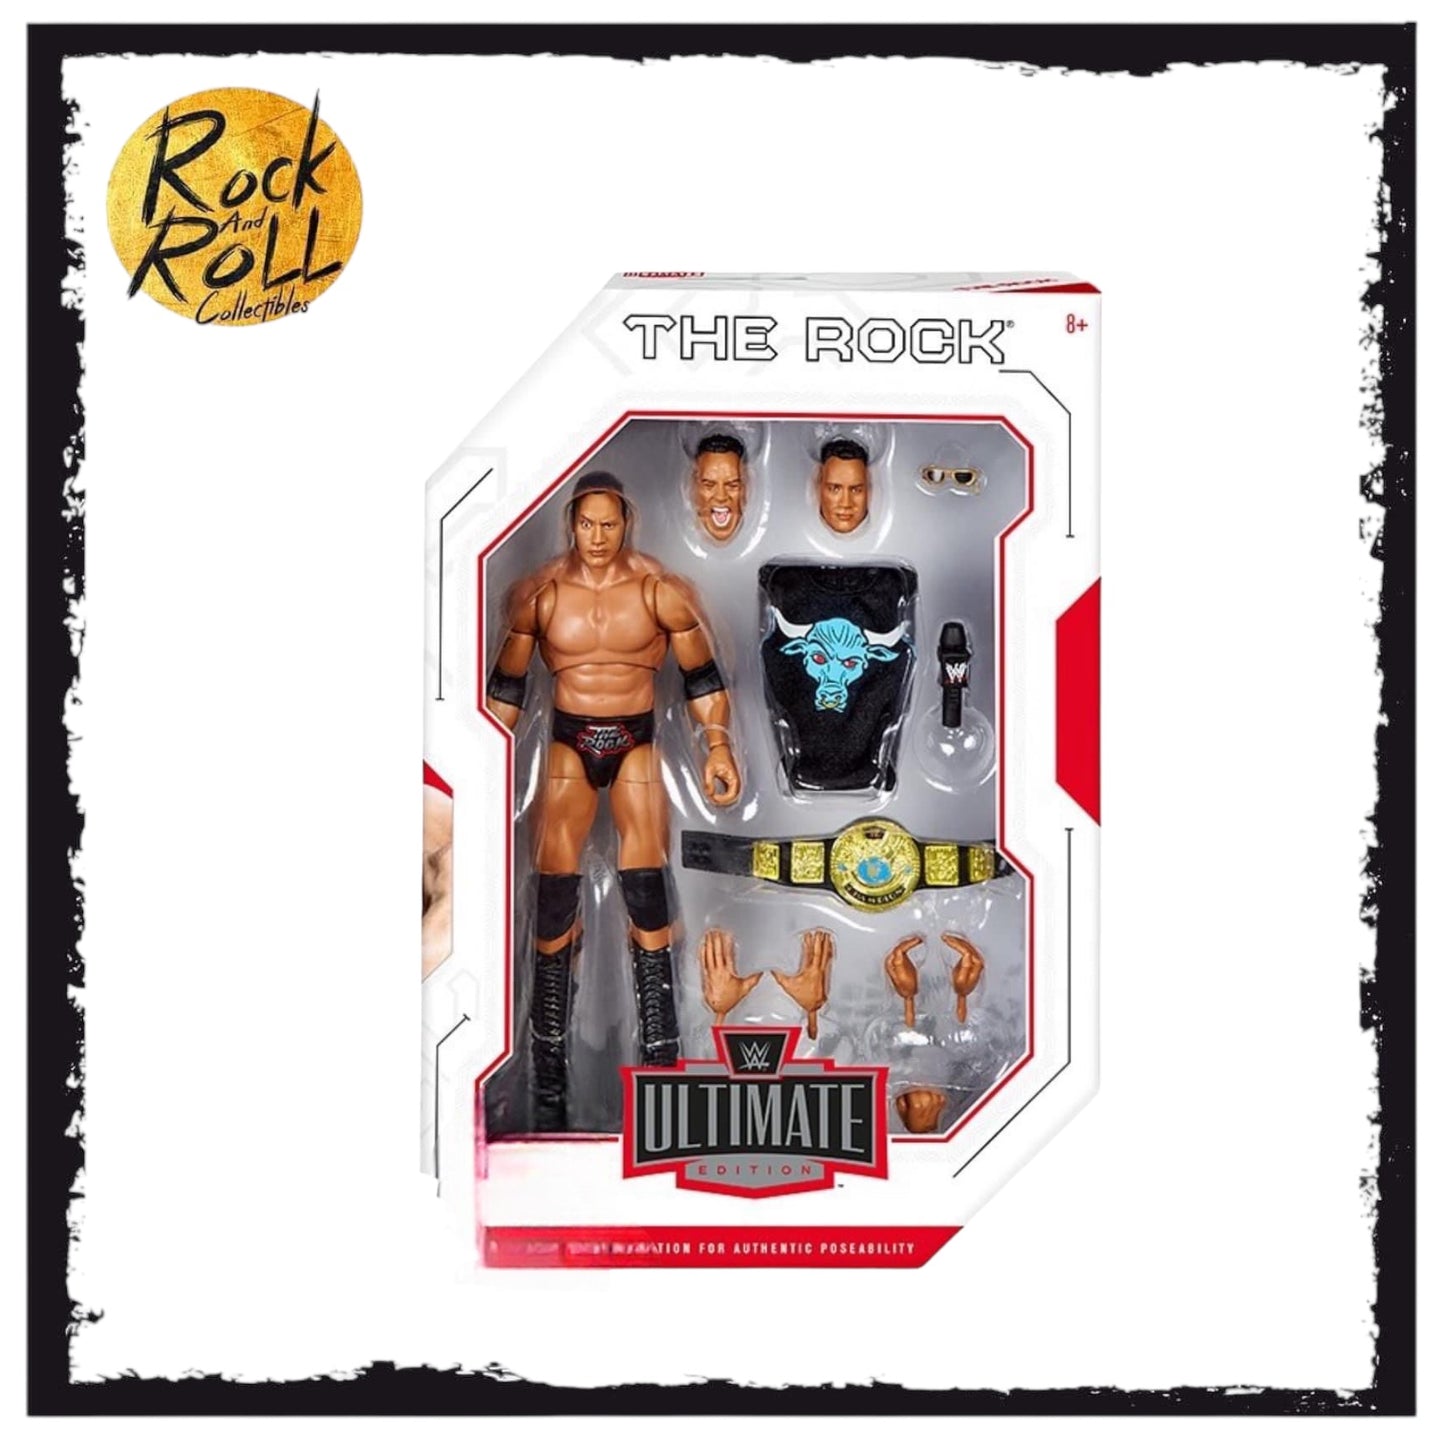 The Rock - WWE Best of Ultimate Edition 4 Pre Order